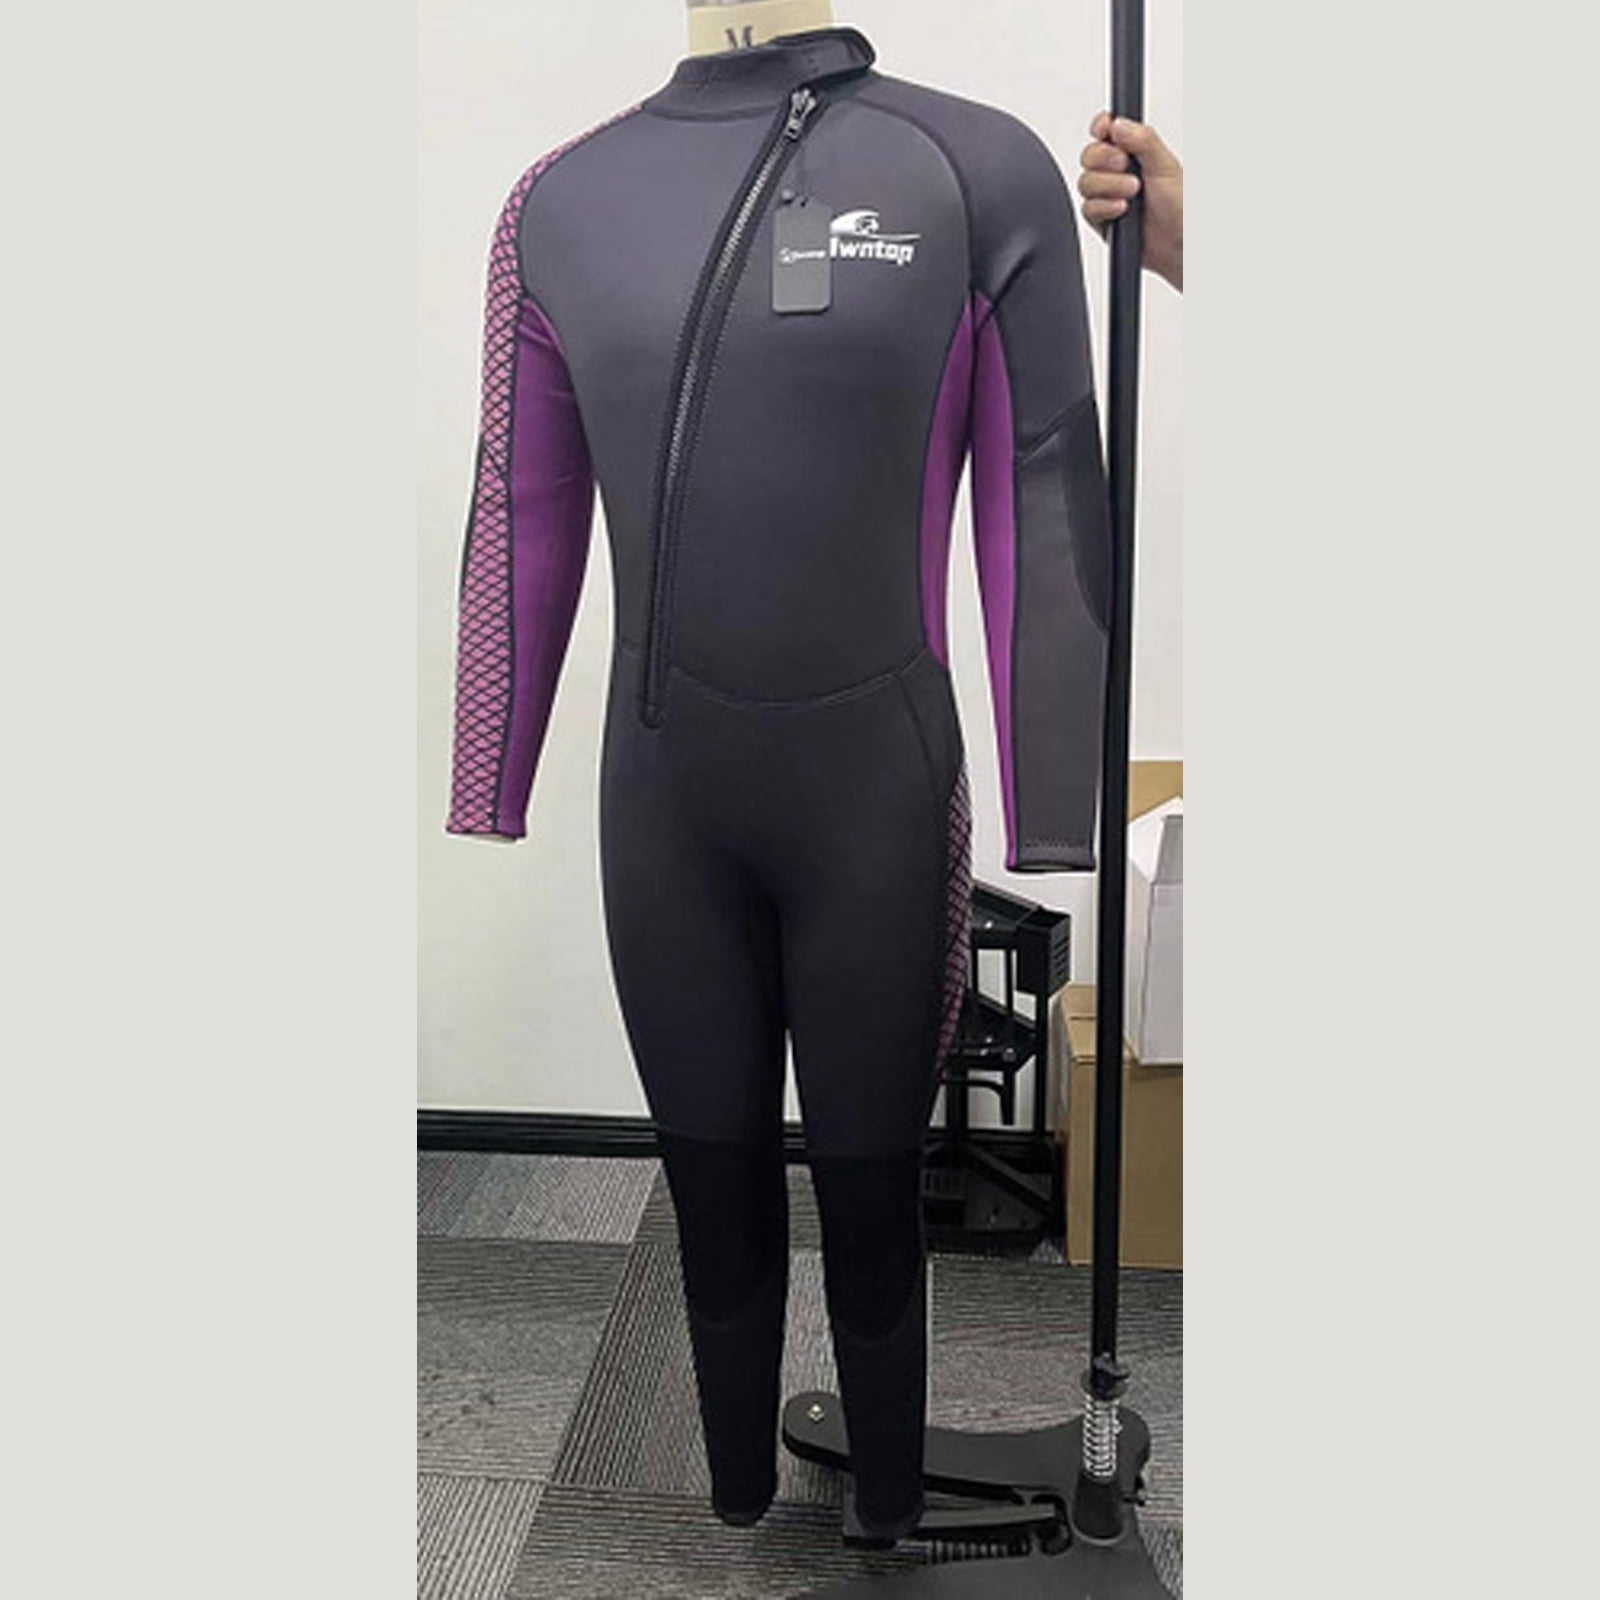 Thermal Full Diving Suits 3mm Neoprene Thicken Keep Warm Wetsuits Surfing Swimming UV Protection Long Sleeve Swimwear Owntop Wetsuits Men Women and Youth 